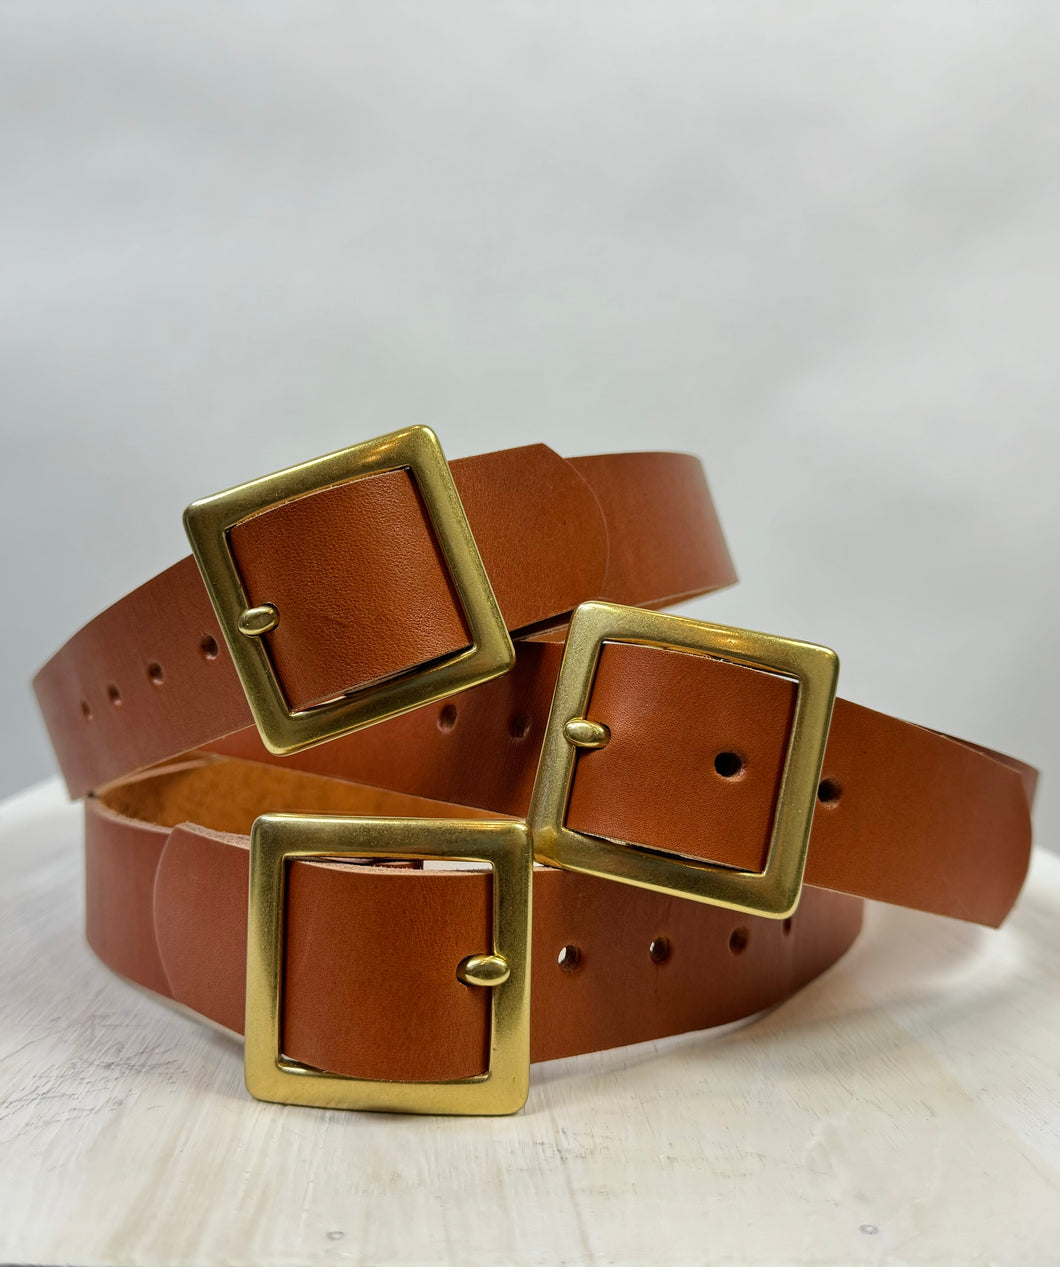 CAMPFIRE COUTURE LEATHER BELT